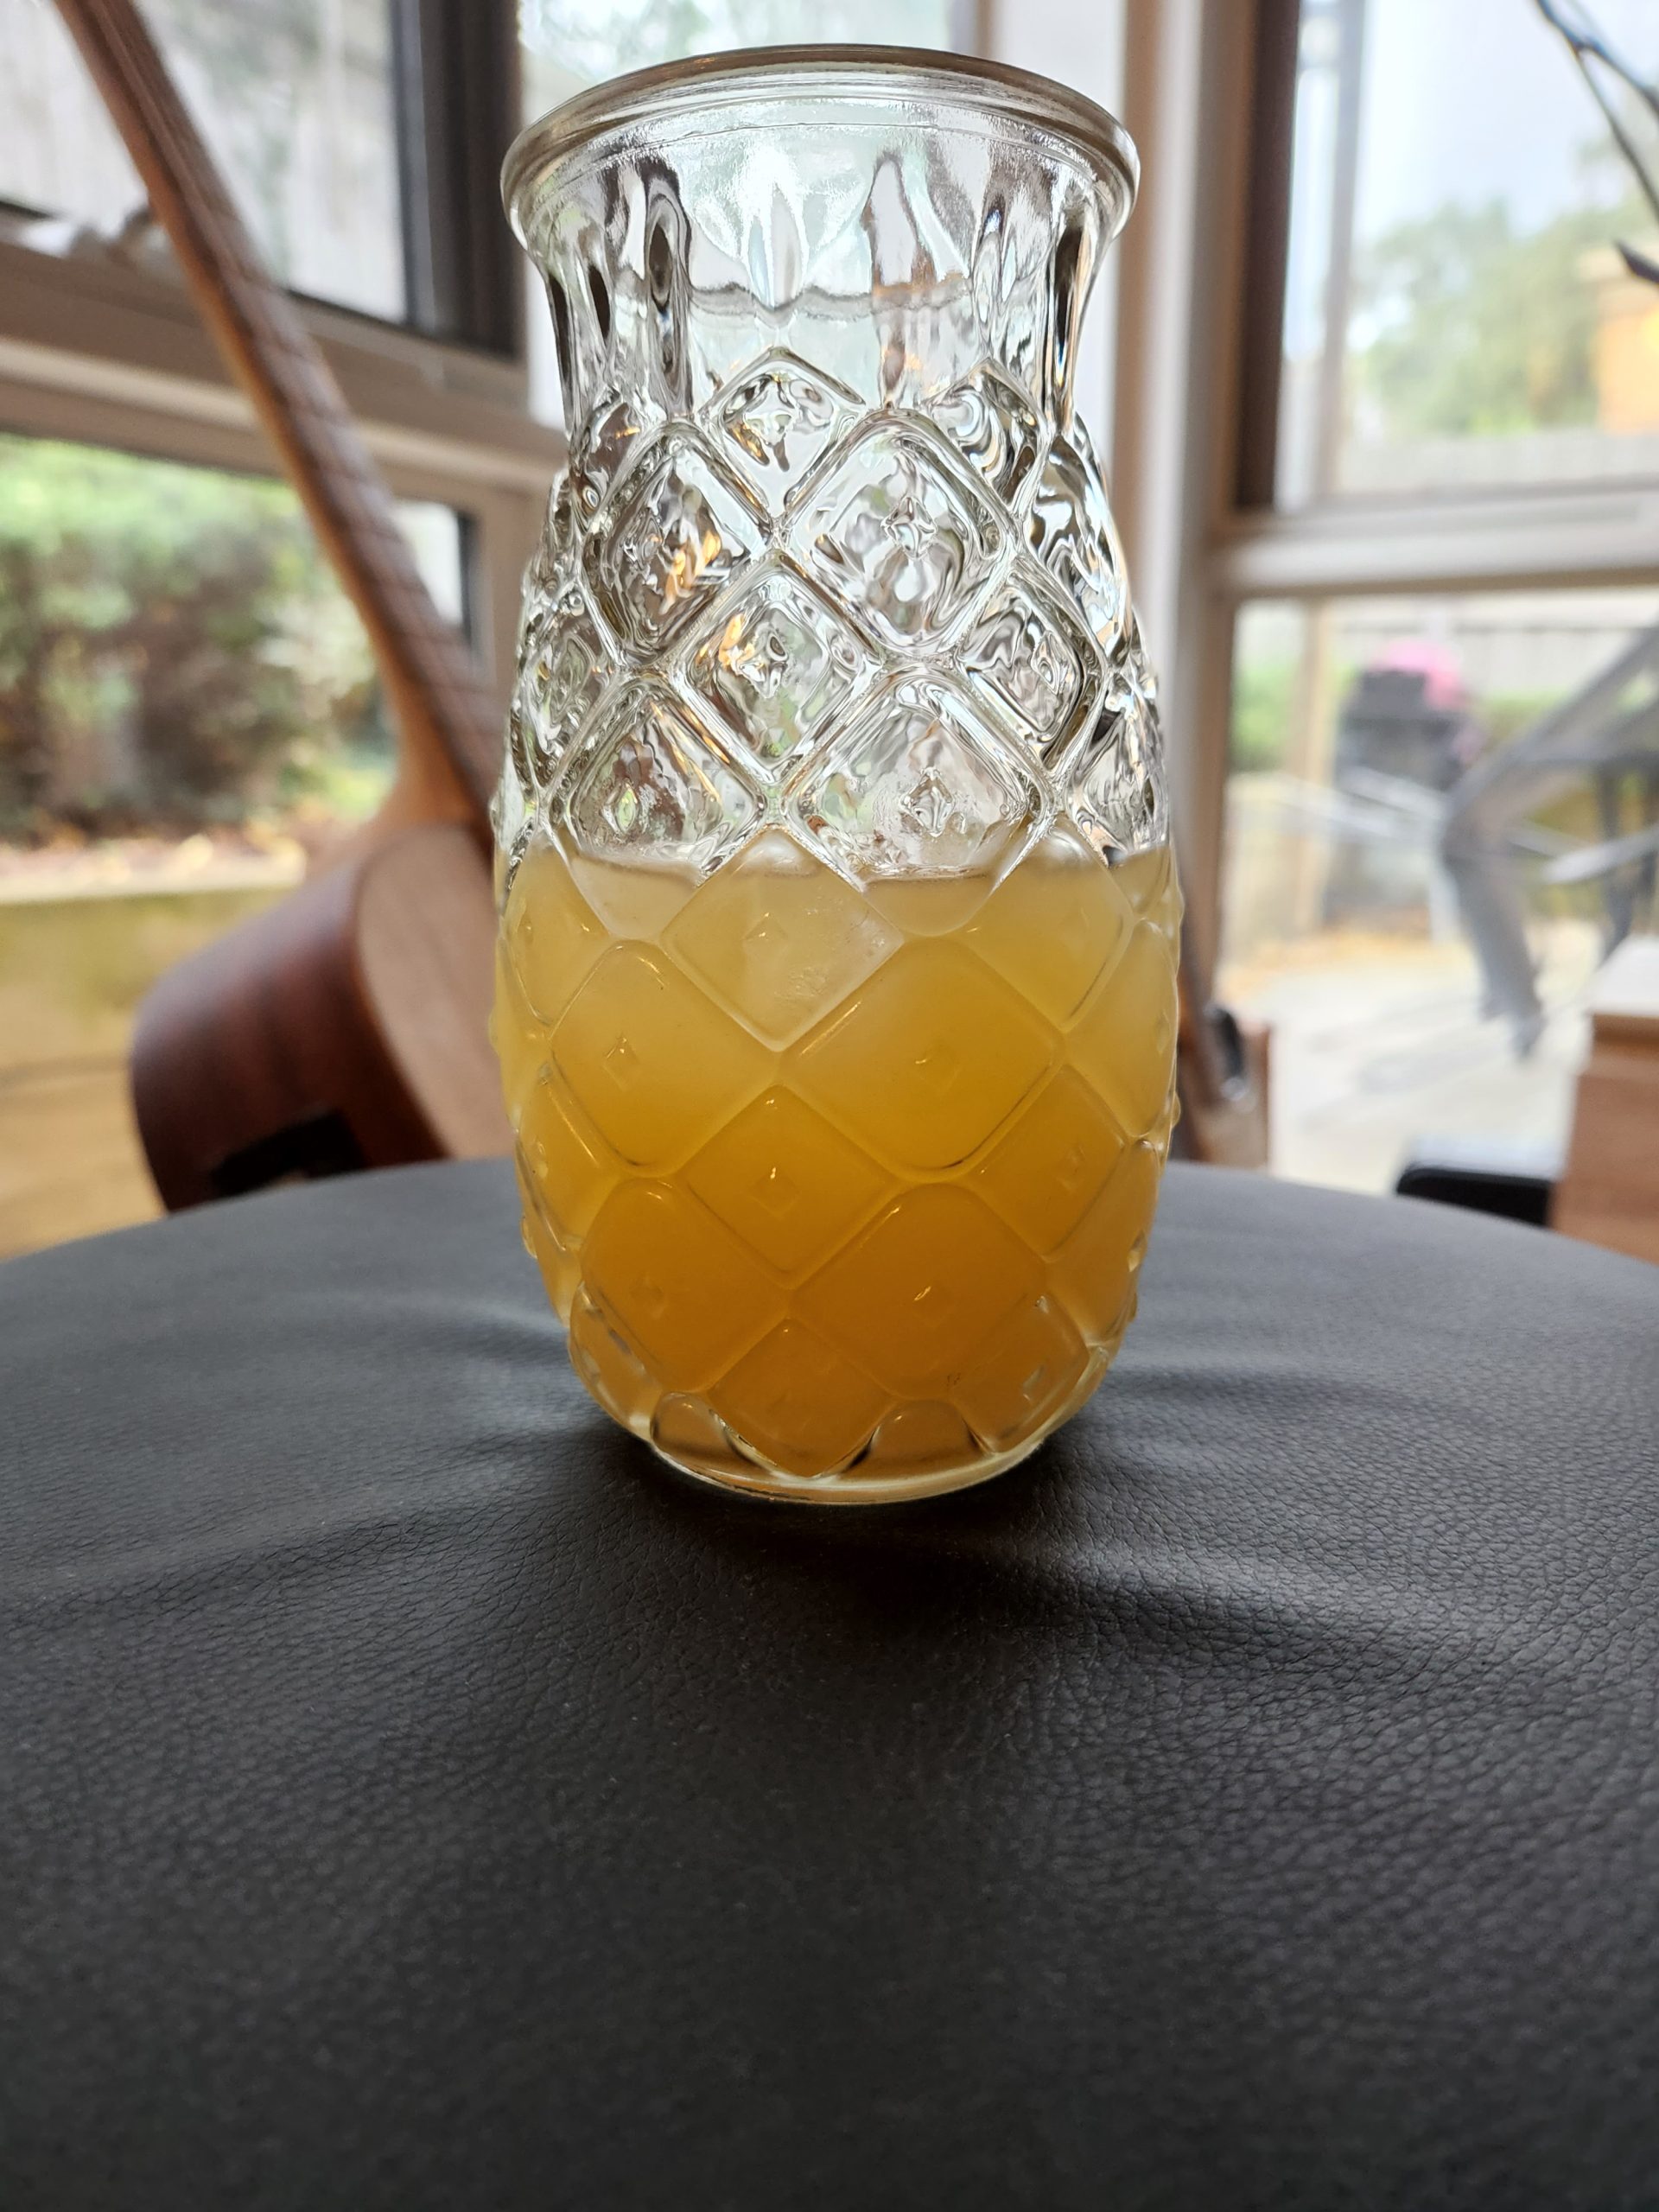 A Scorpion Bowl cocktail served in a glass that looks like a pineapple.